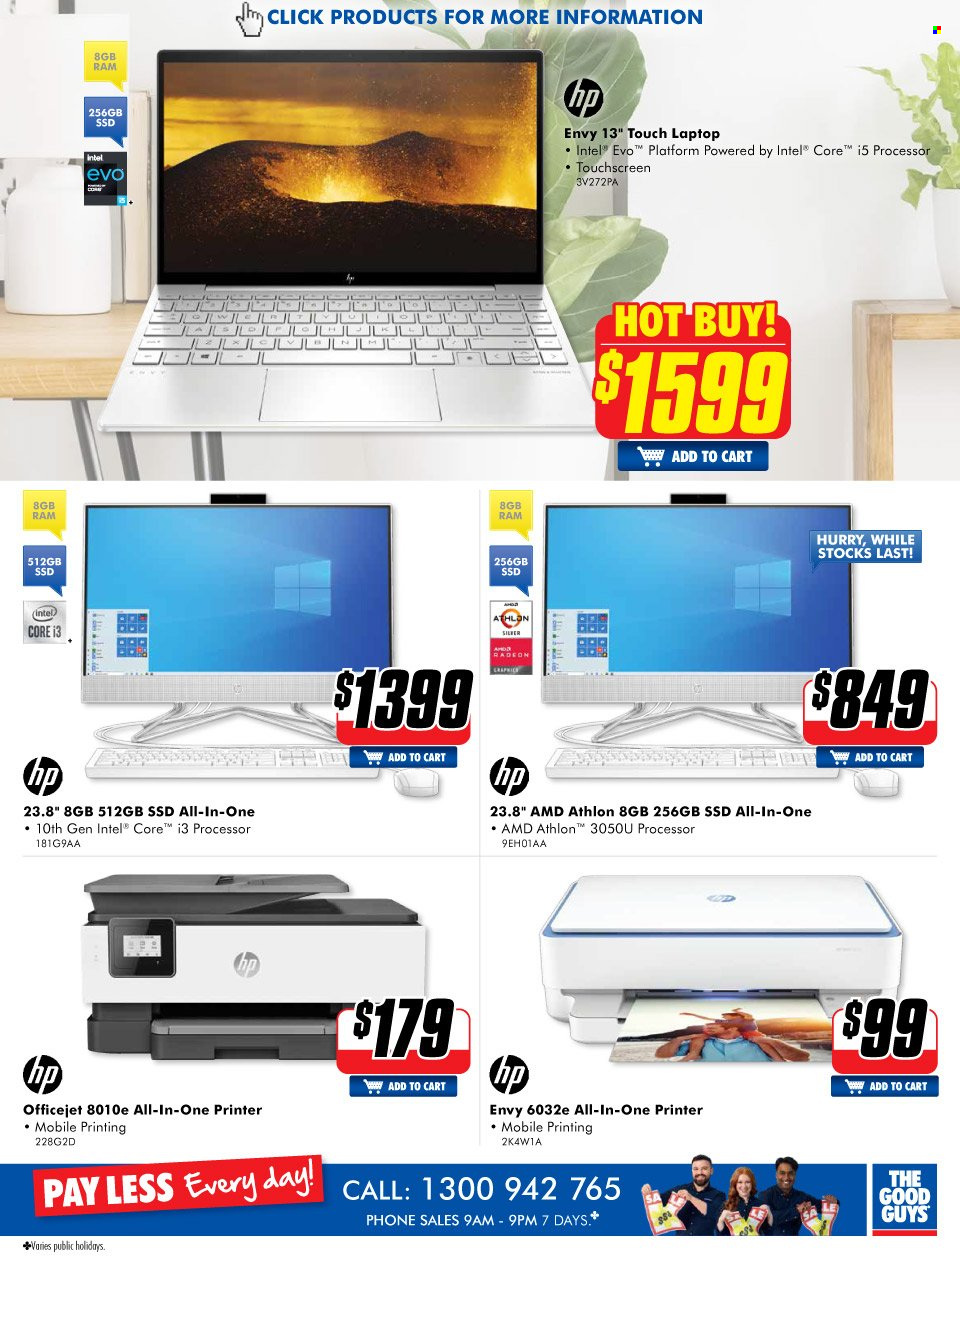 thumbnail - The Good Guys Catalogue - 16 Sep 2021 - 29 Sep 2021 - Sales products - Intel, Hewlett Packard, laptop, Athlon, all-in-one printer, printer, HP OfficeJet. Page 16.